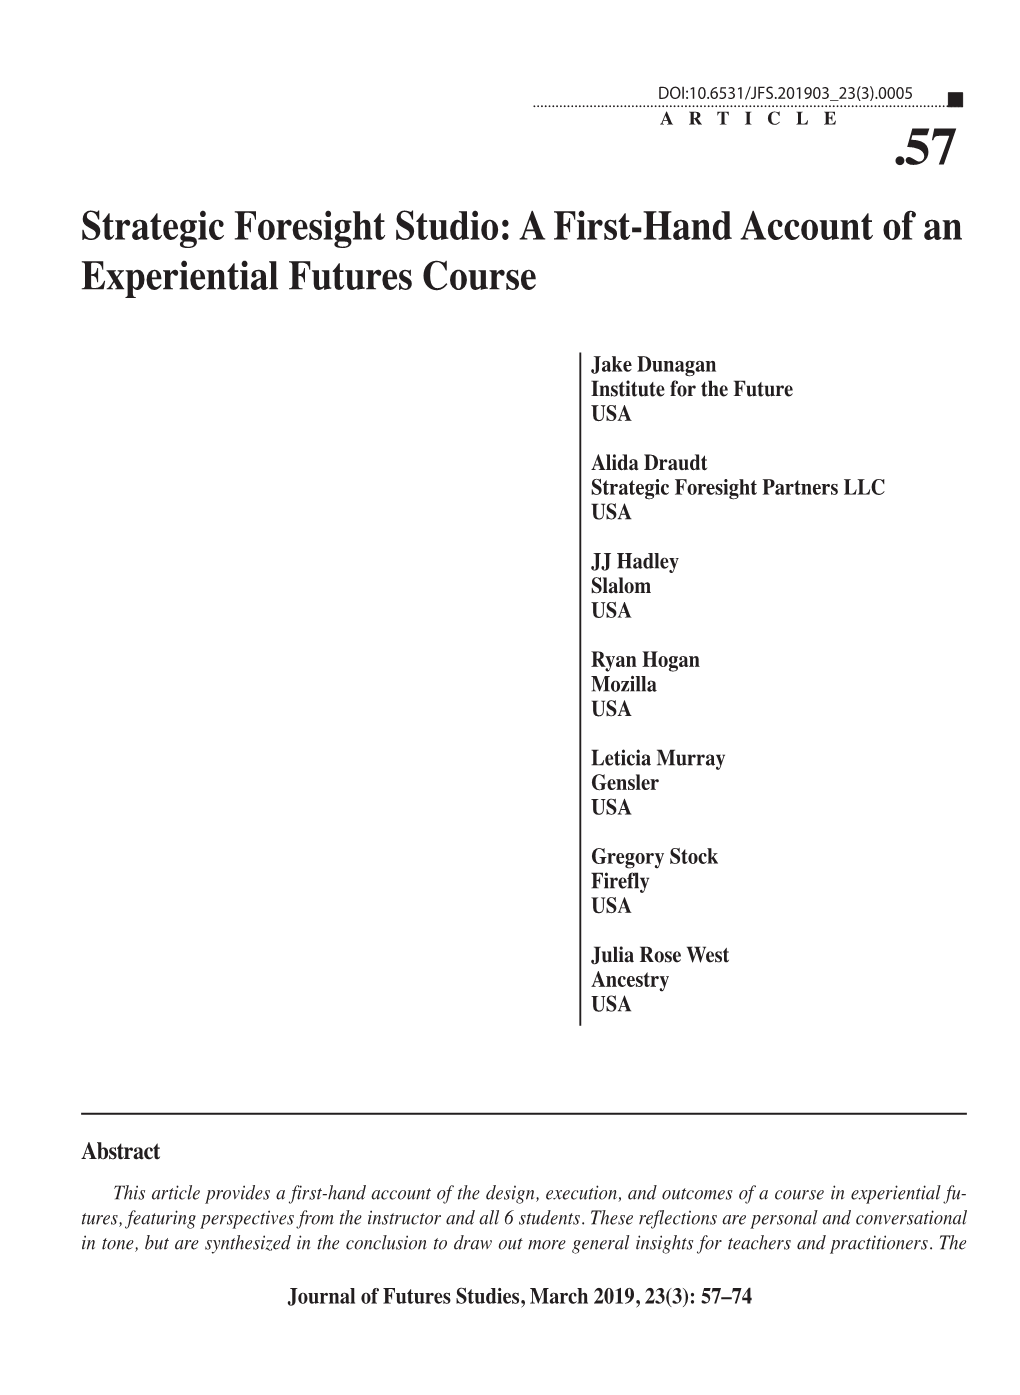 Strategic Foresight Studio: a First-Hand Account of an Experiential Futures Course